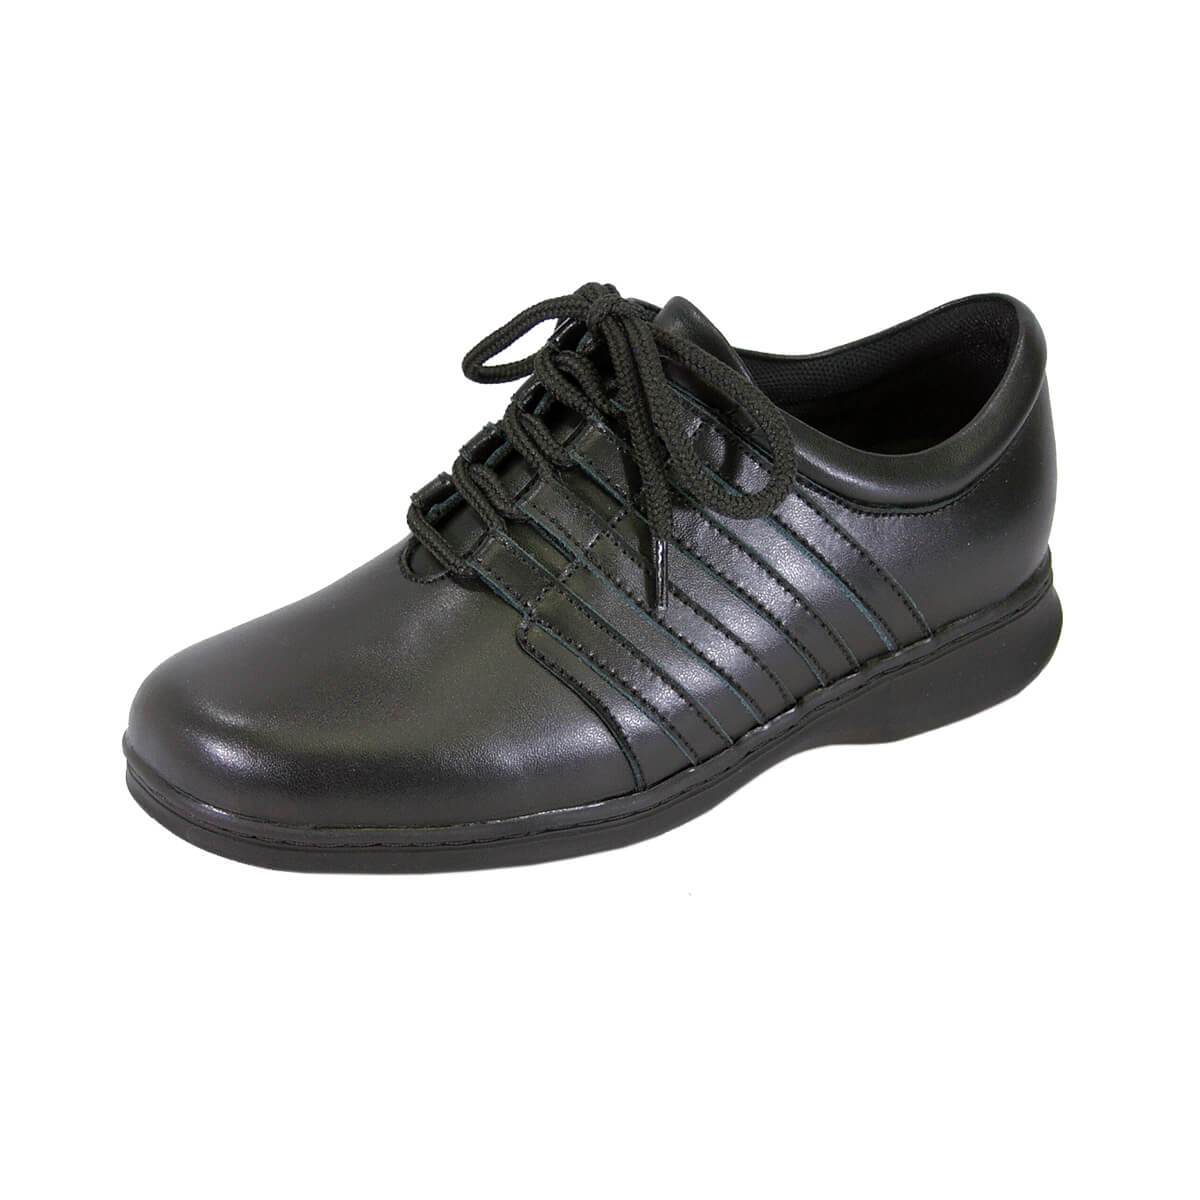 Fazpaz 24 Hour Comfort Lara Women's Wide Width Leather Side Stitched Stripes Oxford Lace-Up Shoes